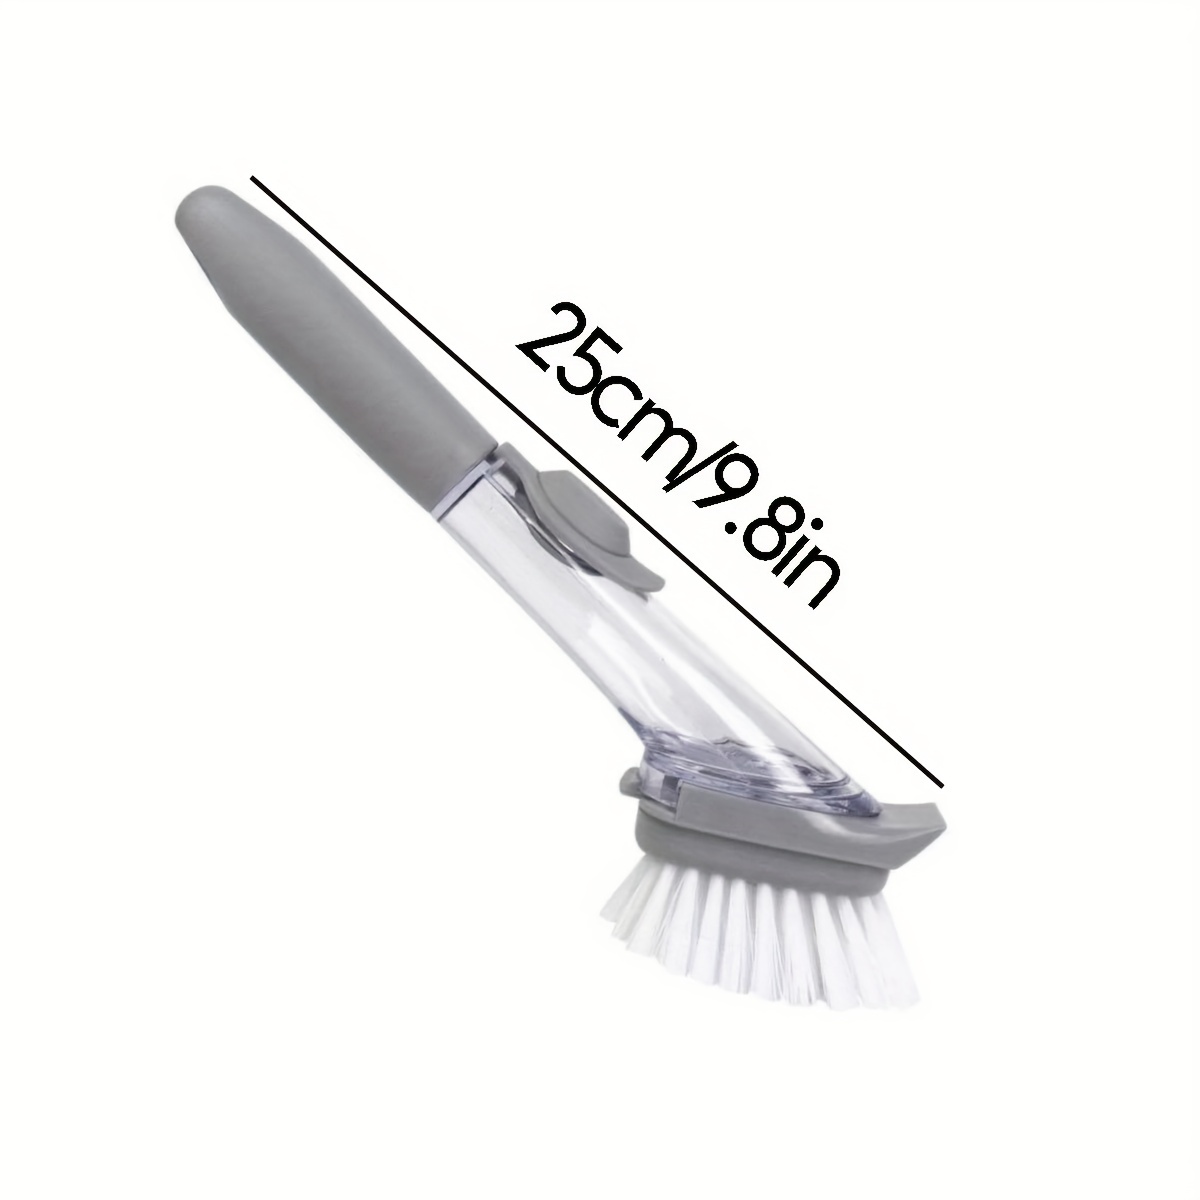 Stainless Steel Scrubber with Handle for Cleaning Dishes Reusable Dish Brush